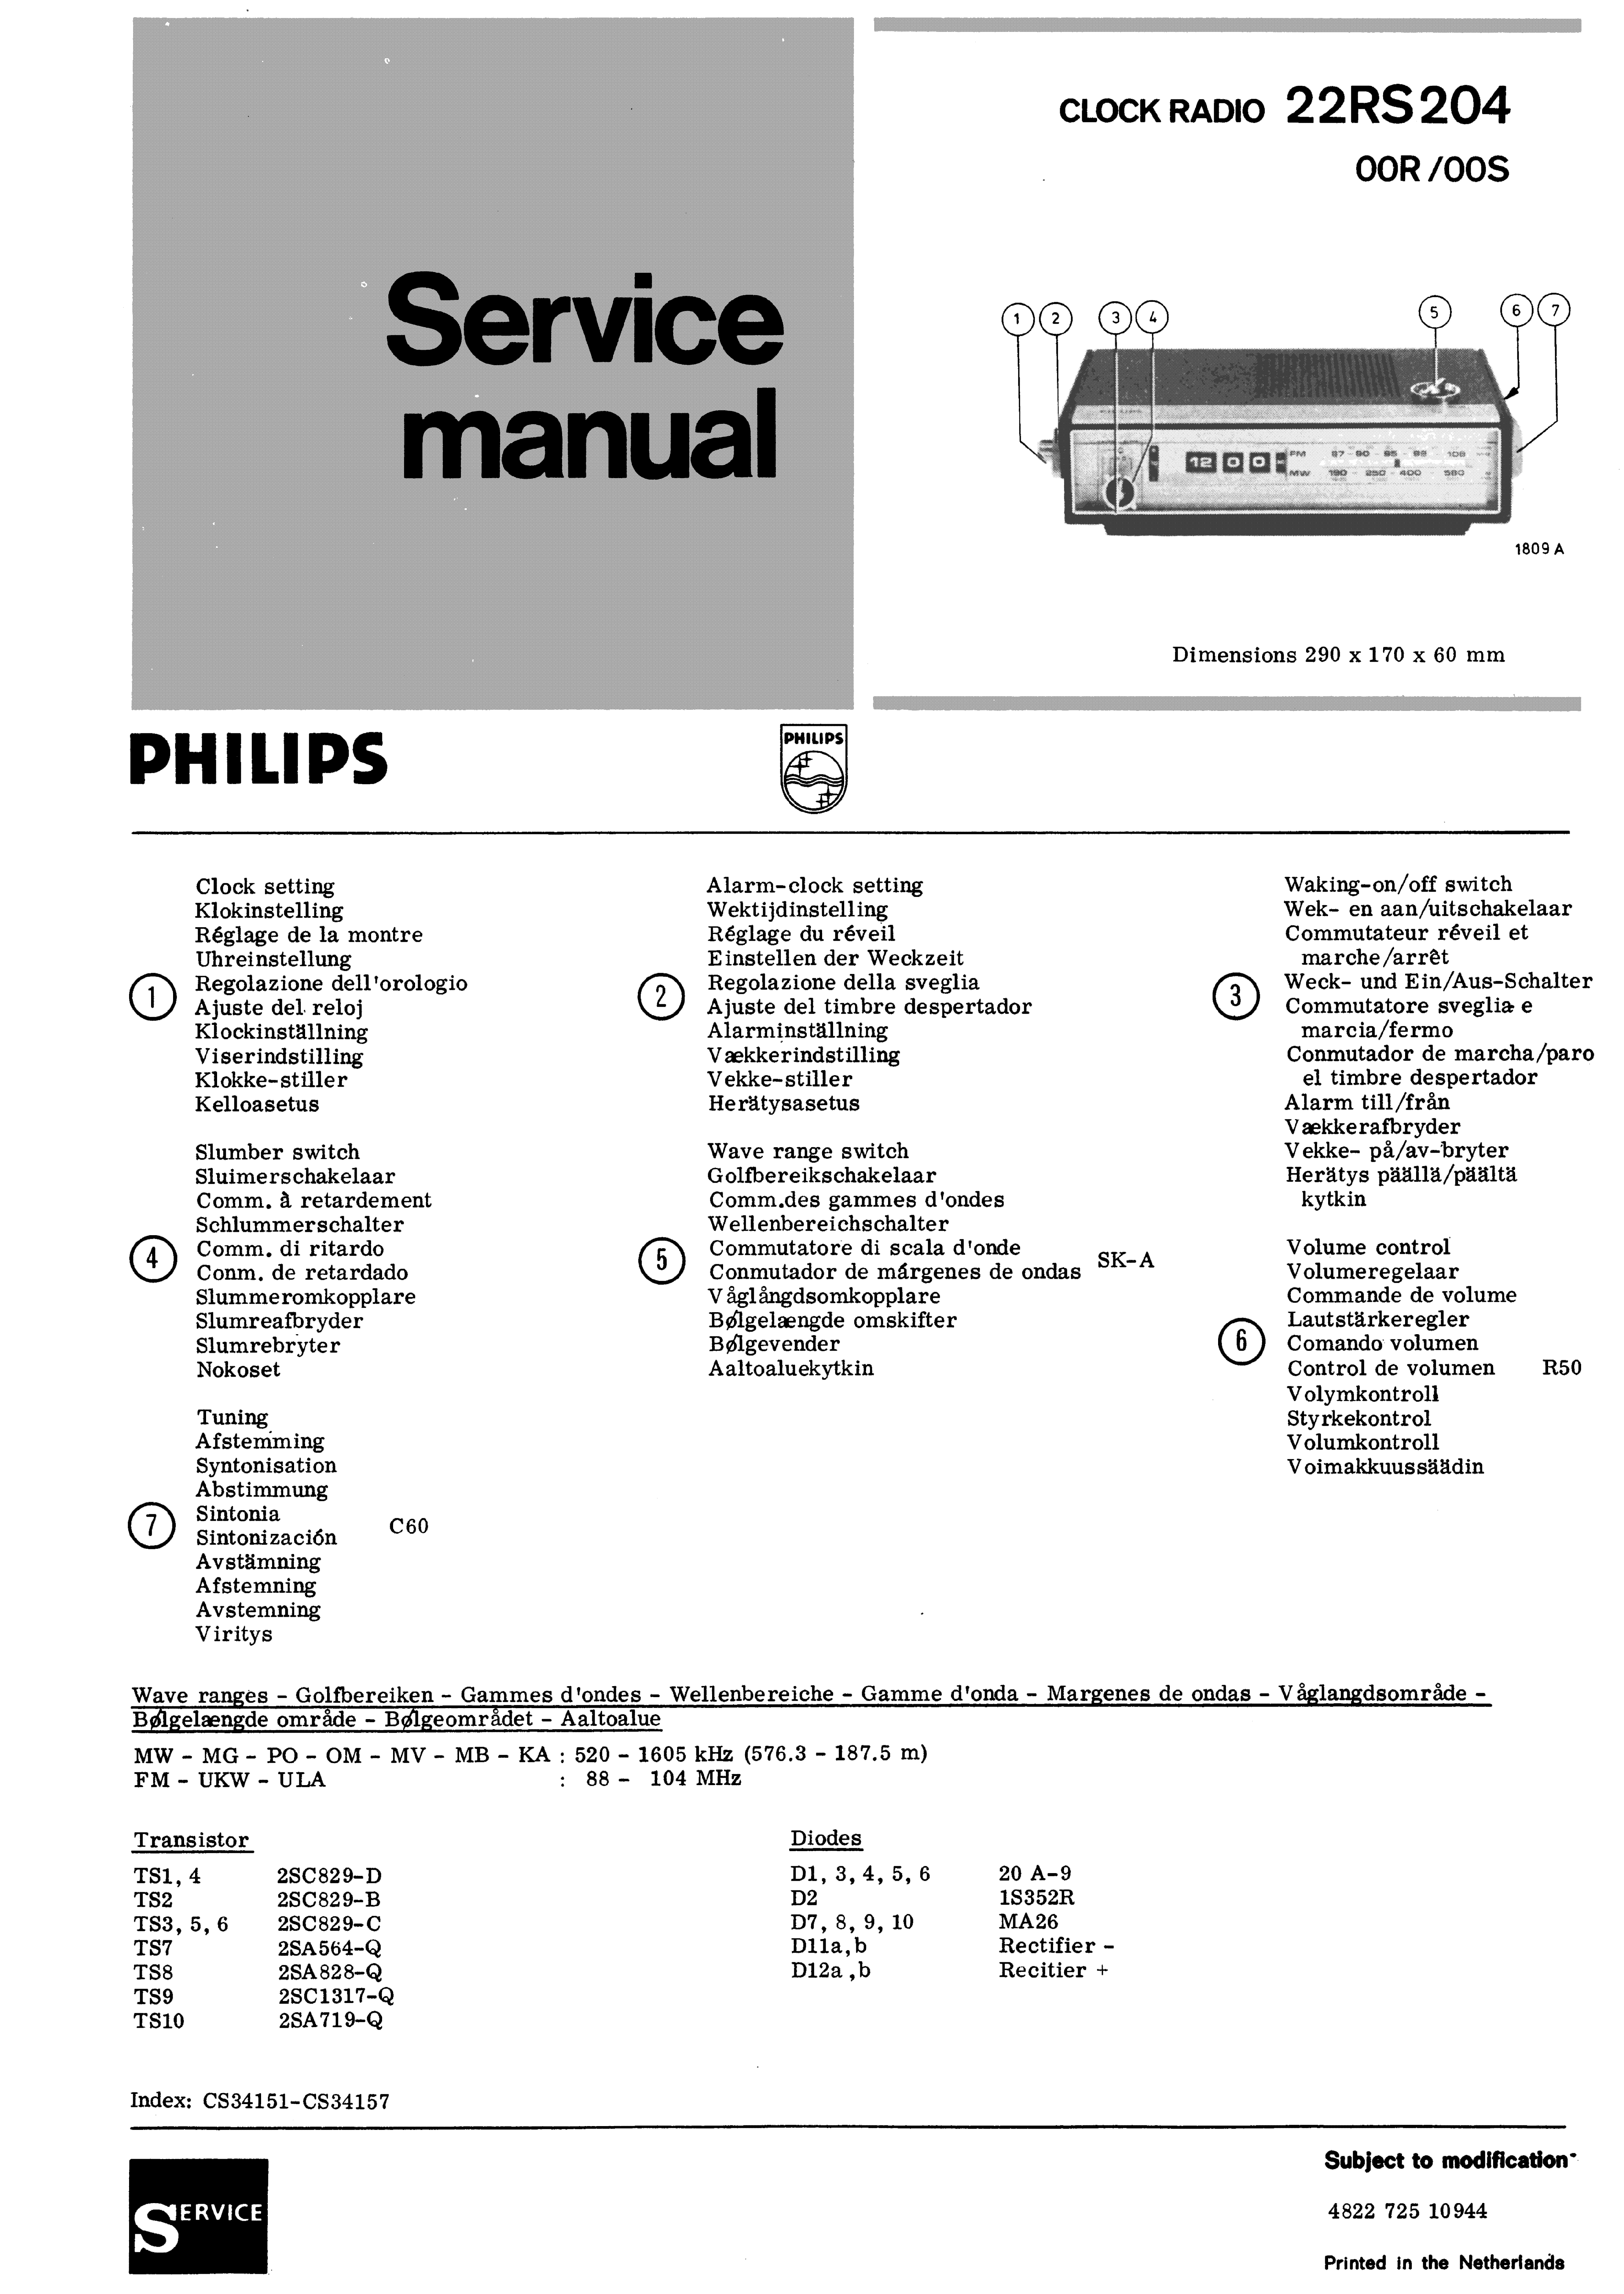 PHILIPS CLOCK RADIO 22RS204 SM service manual (1st page)